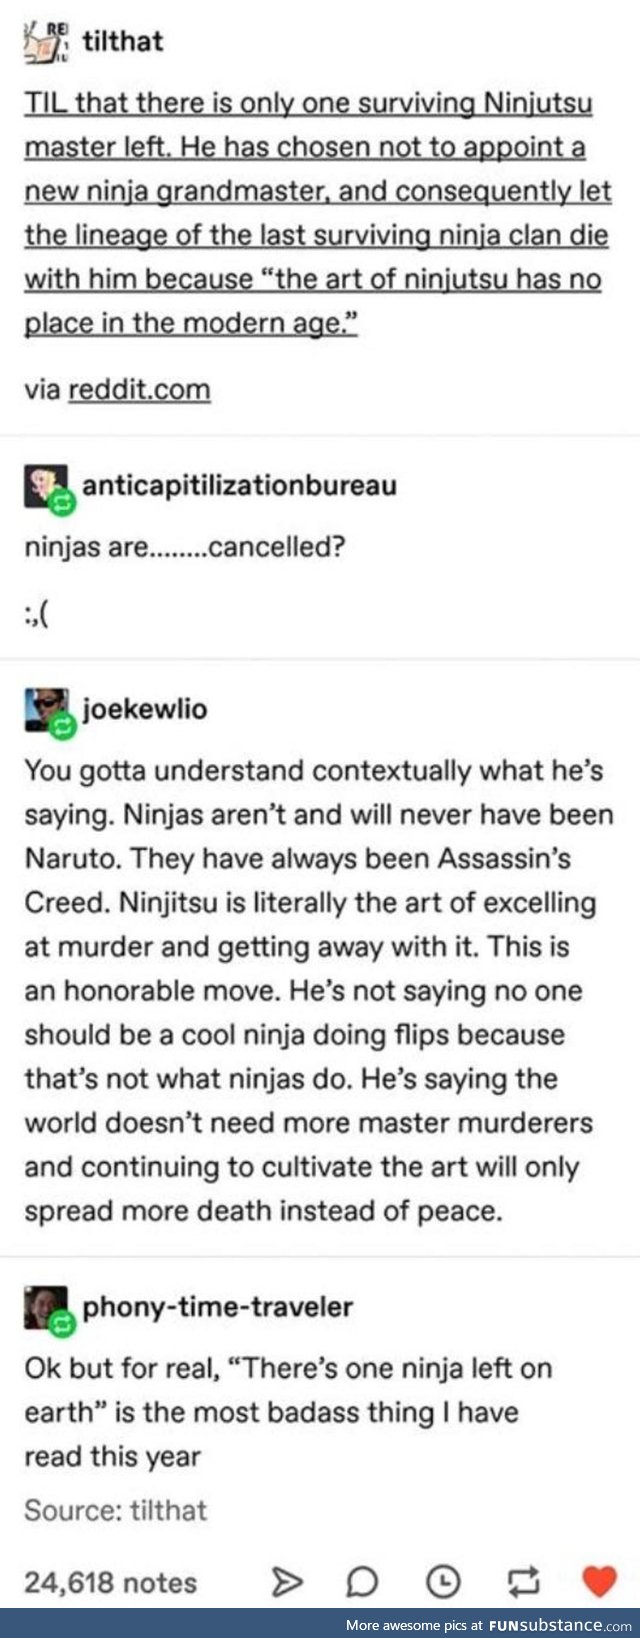 What if he's just saying it so we don't look for the other ninja?